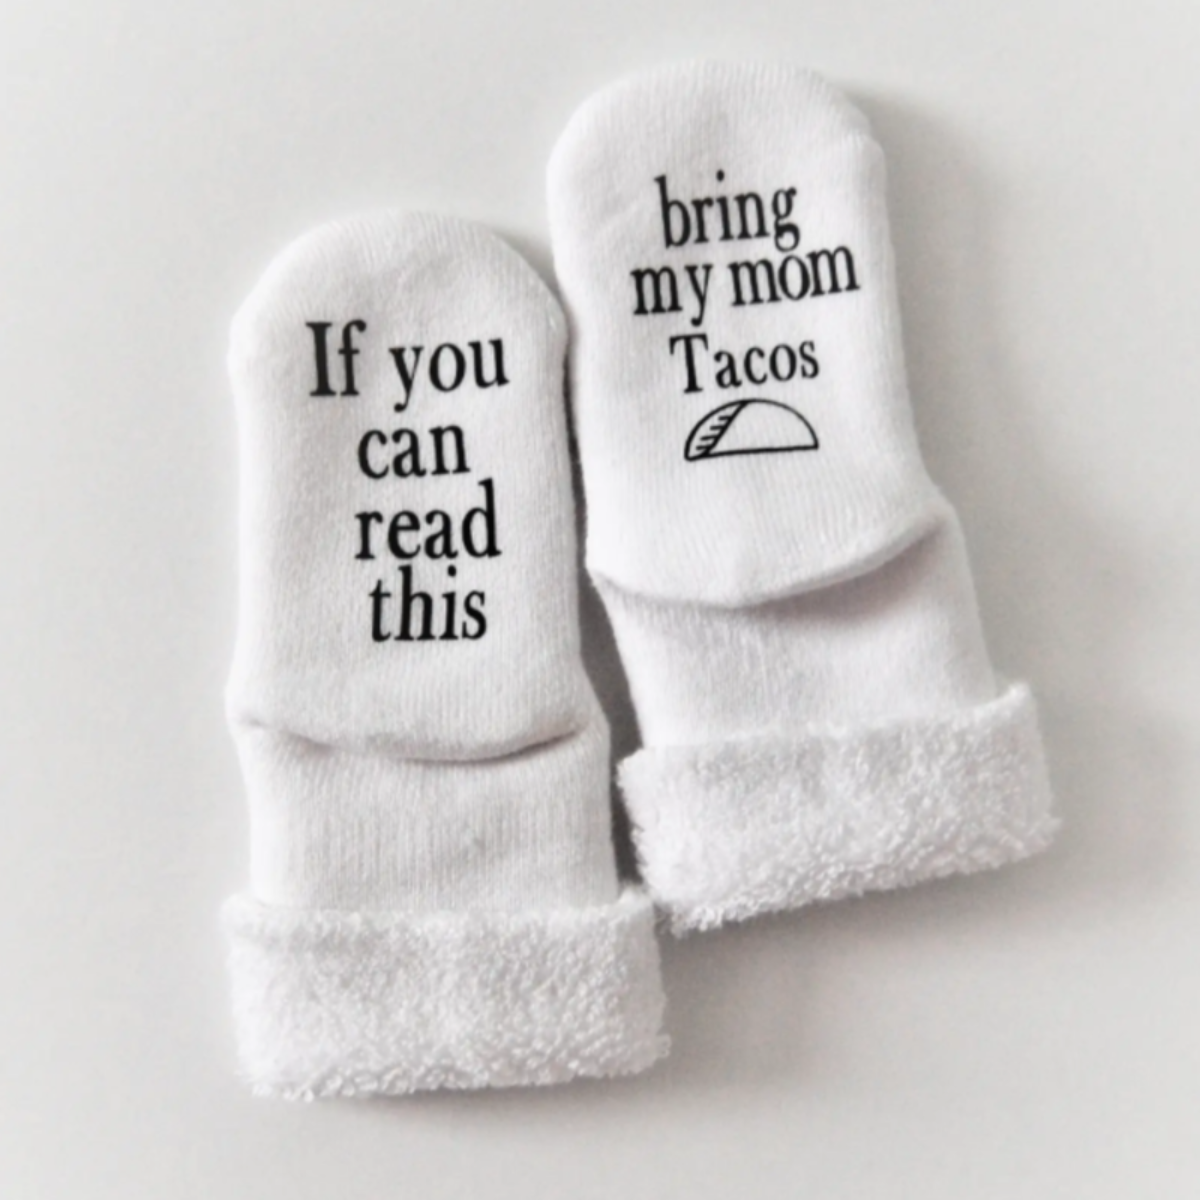 Funny baby socks for new parents | if you can read this, bring my mom tacos baby socks